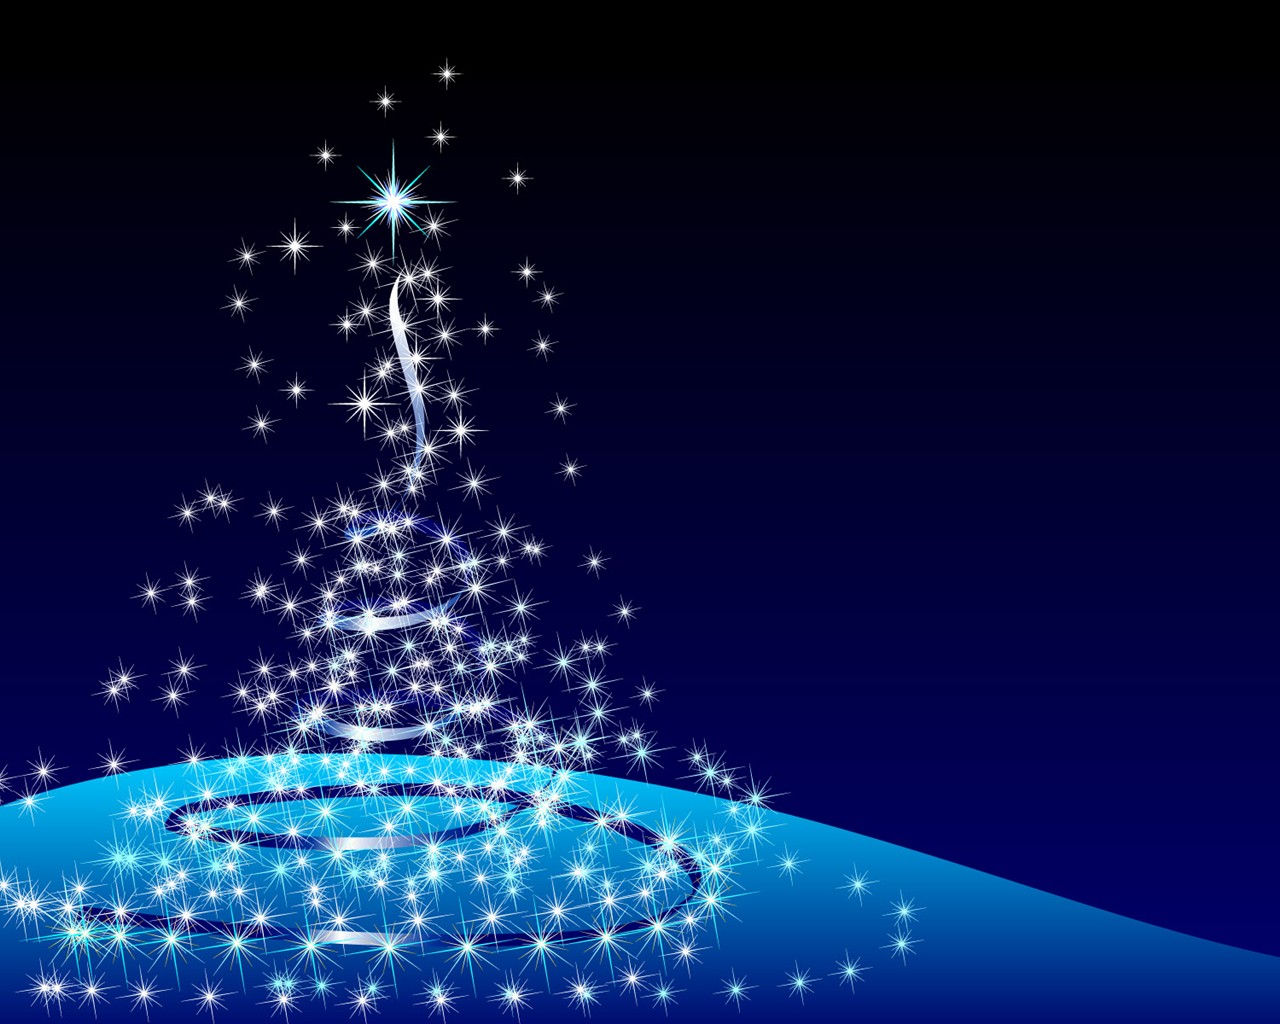 Exquisite Christmas Theme HD Wallpapers #2 - 1280x1024